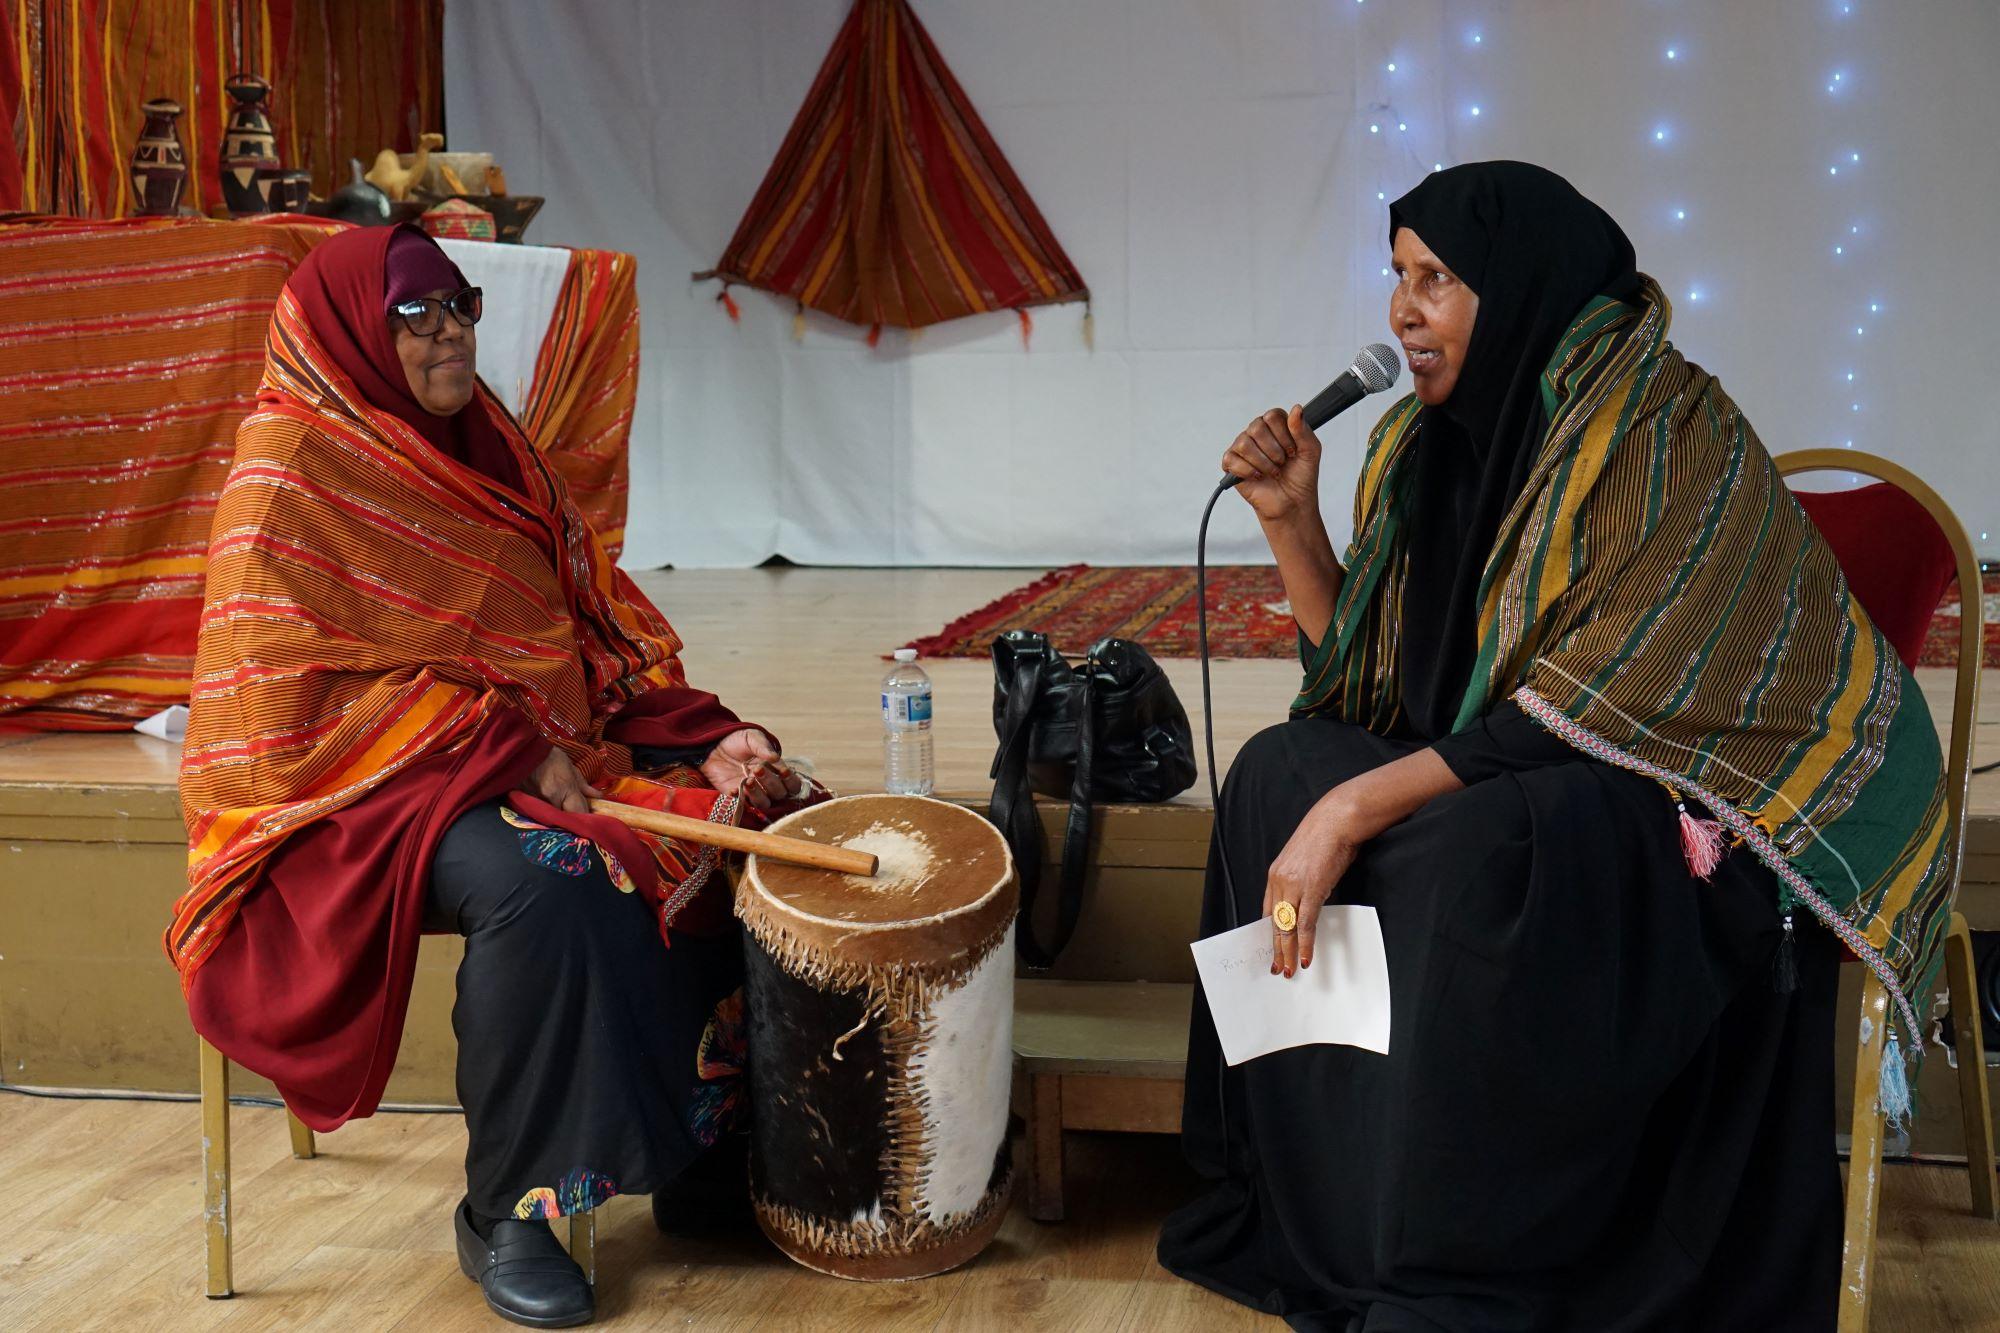 Performers at the Somali Cultural Event